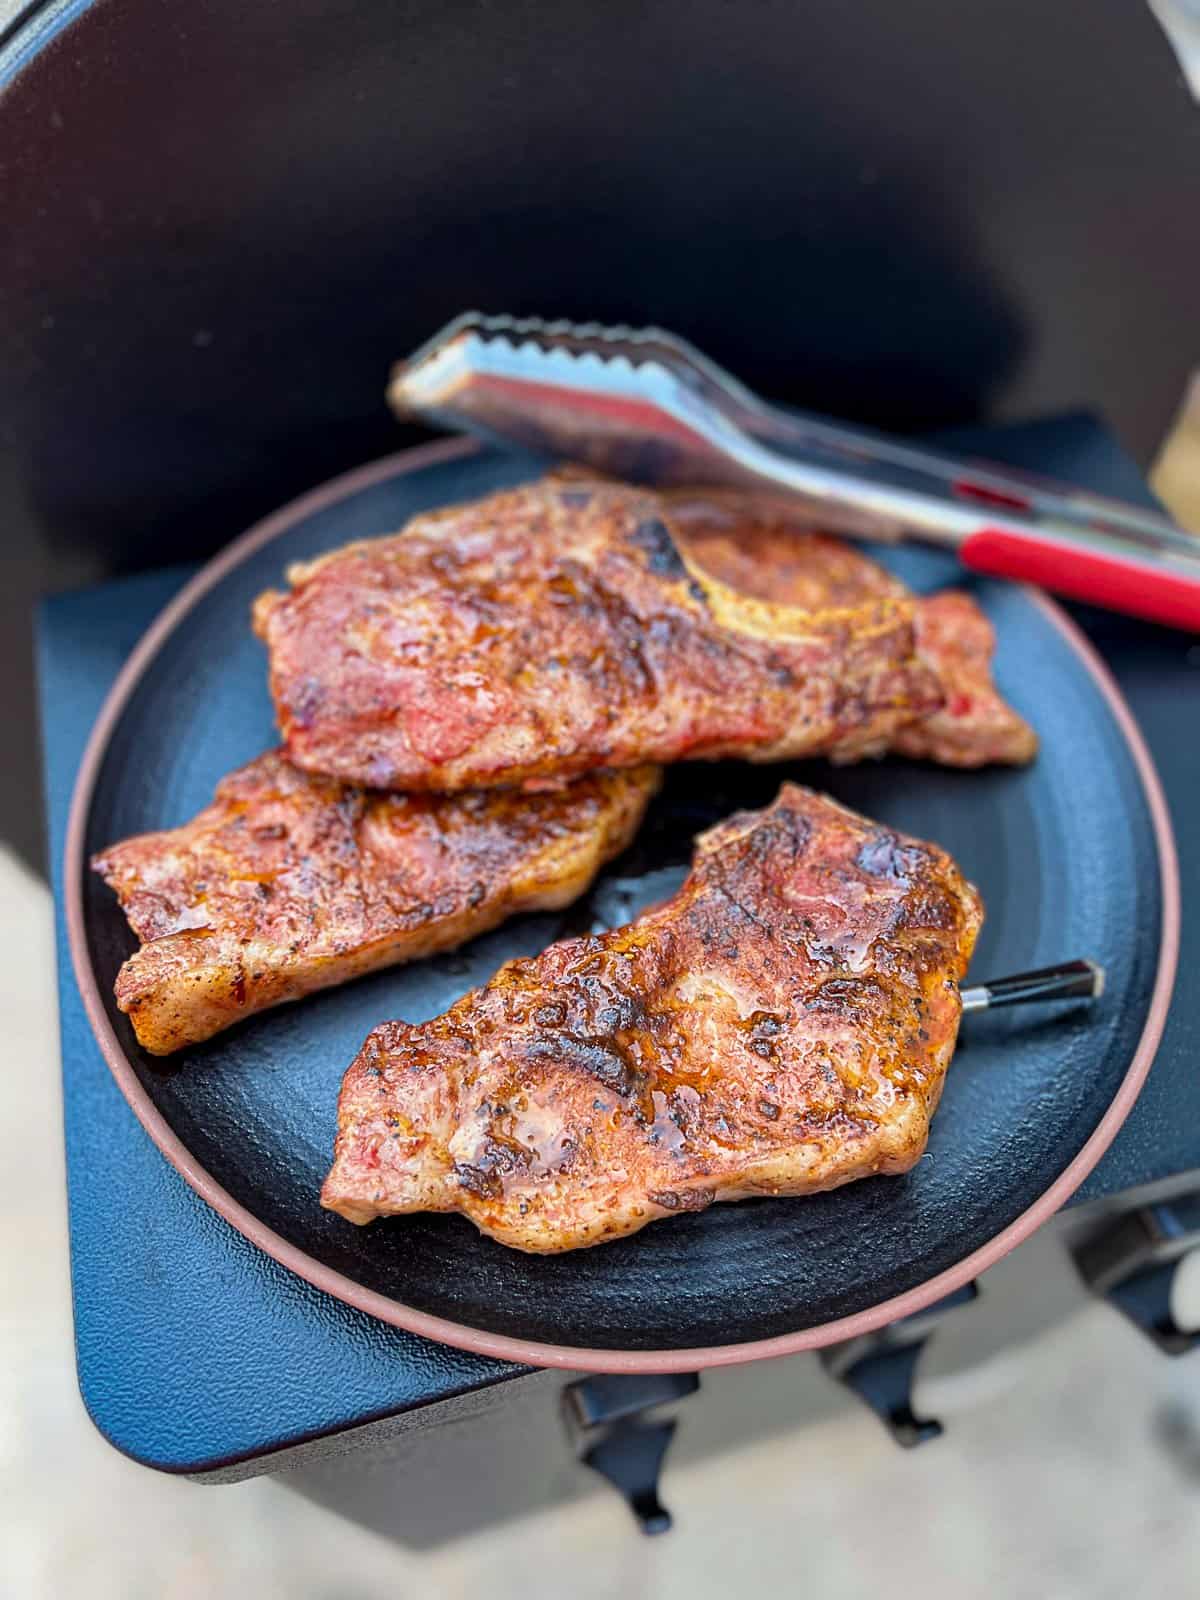 Smoked Pork Chops Traeger Recipe For Beginners to Smoking Meats